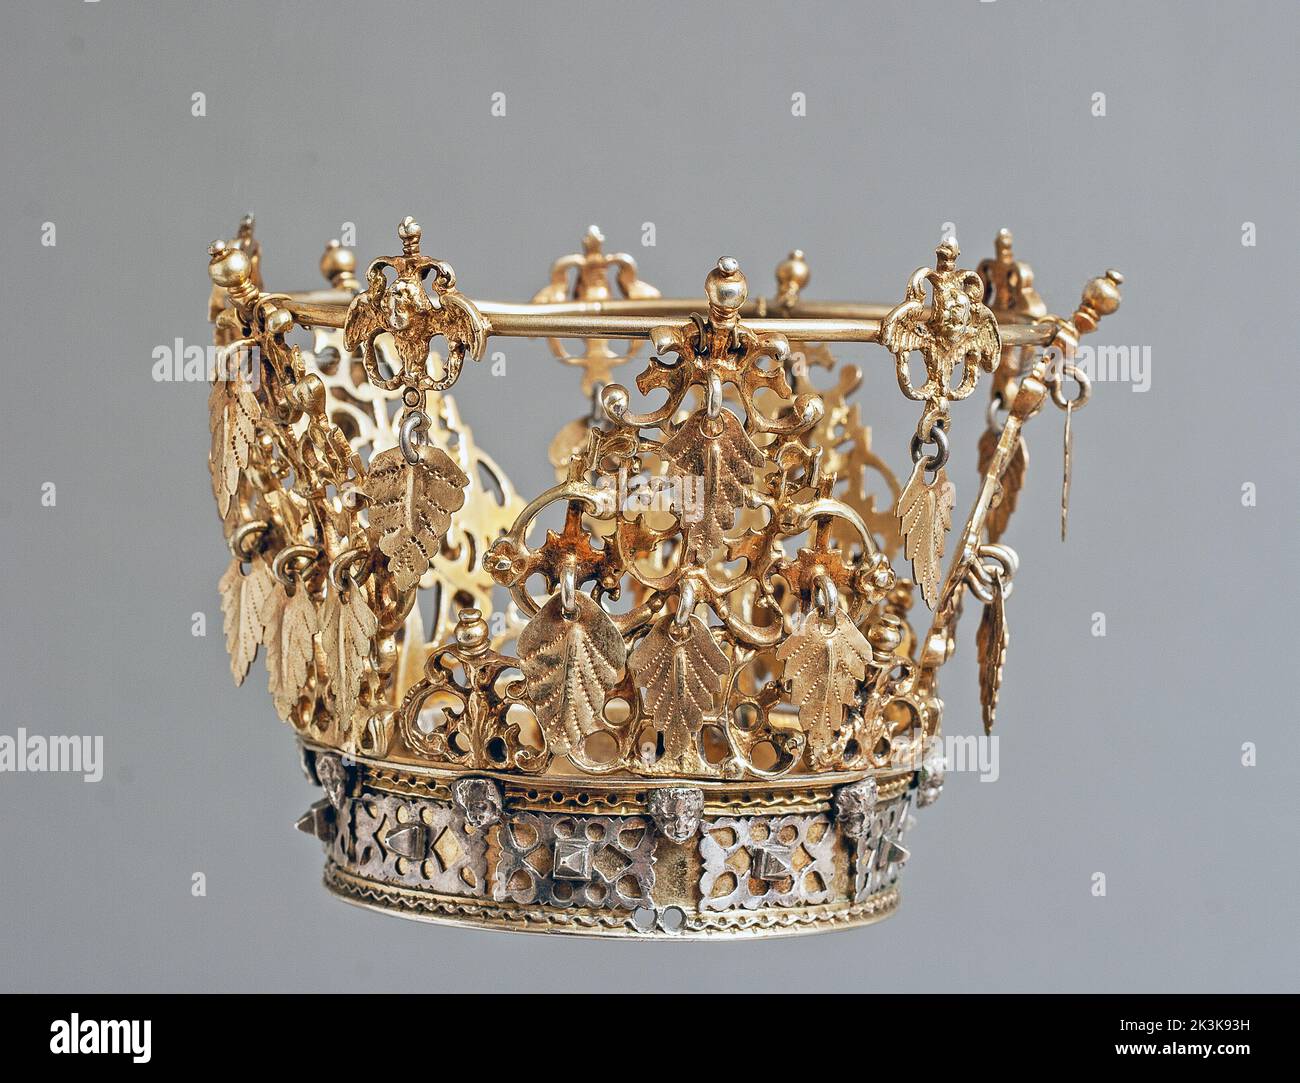 Bridal crown from sormland, sweden Stock Photo